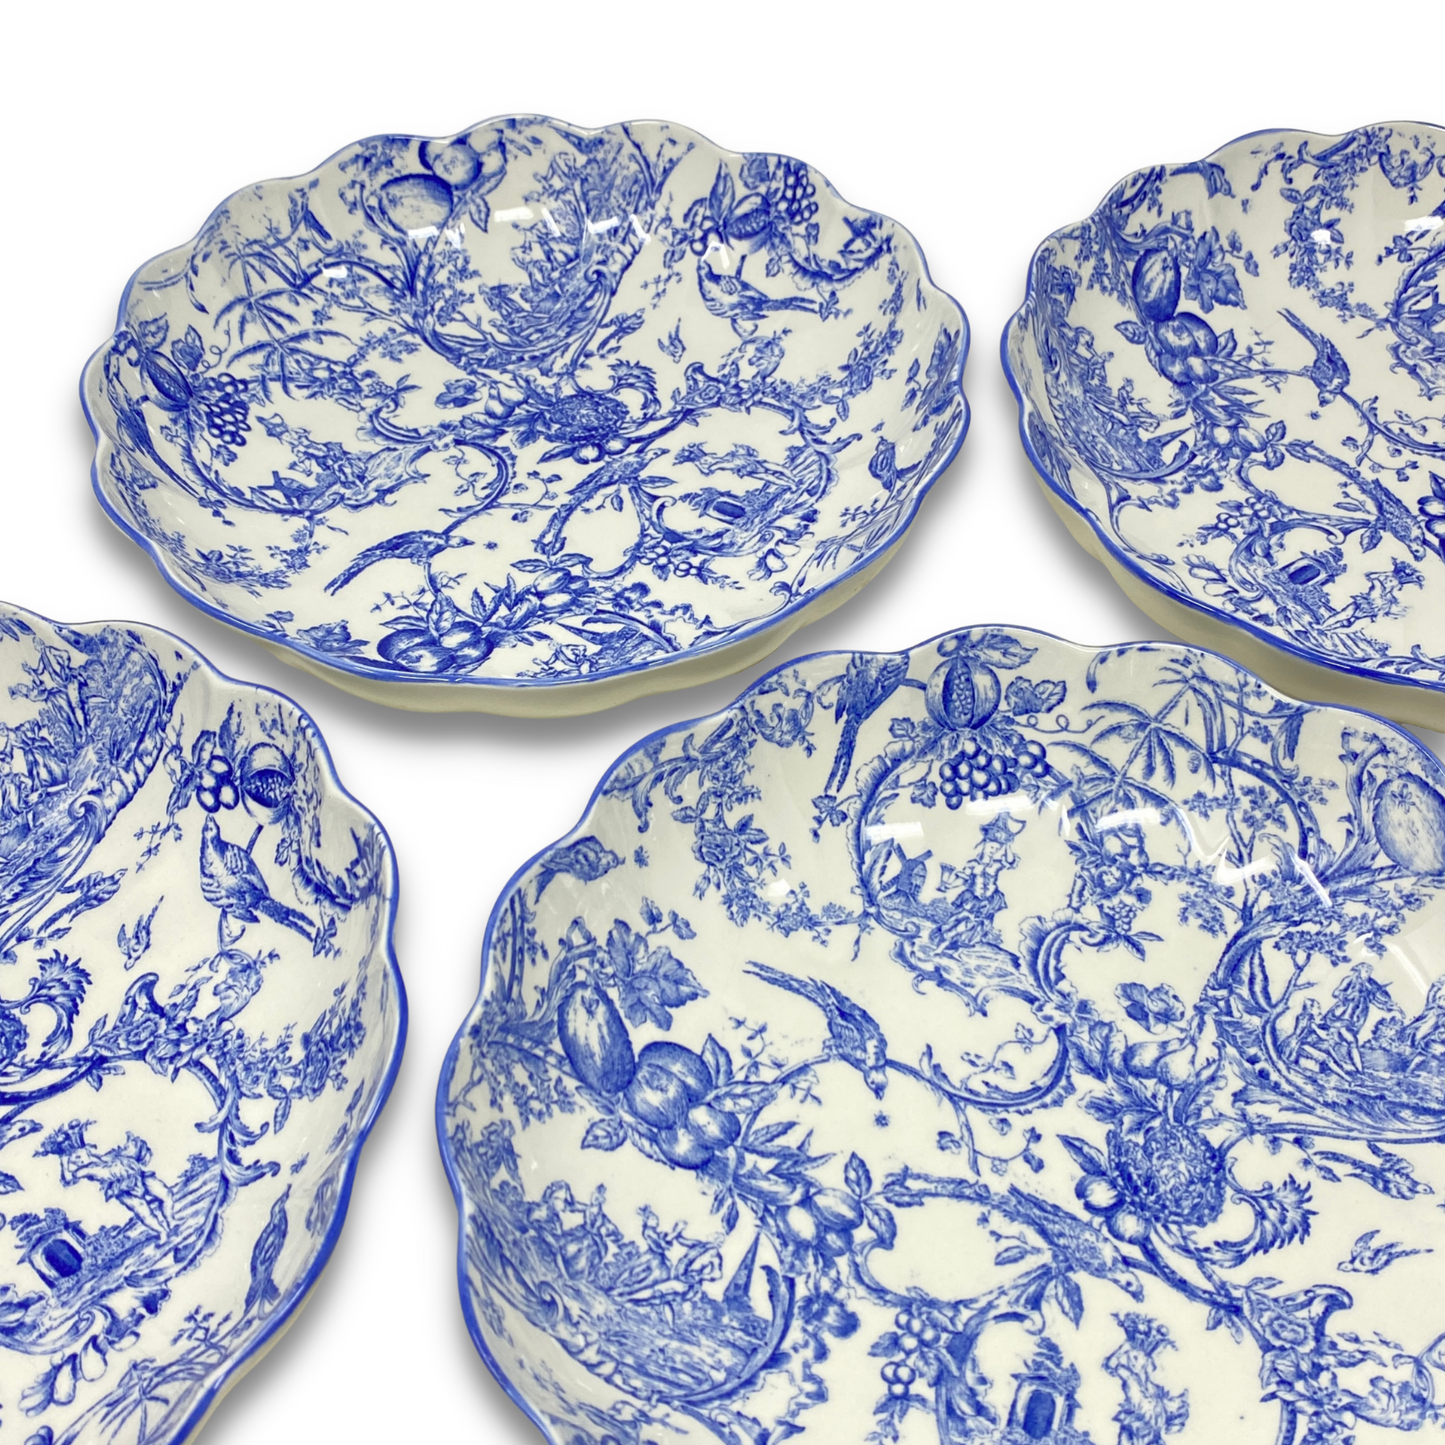 Spode Williamsburg Provincial Garden Blue Large Round Fluted Dishes (4)